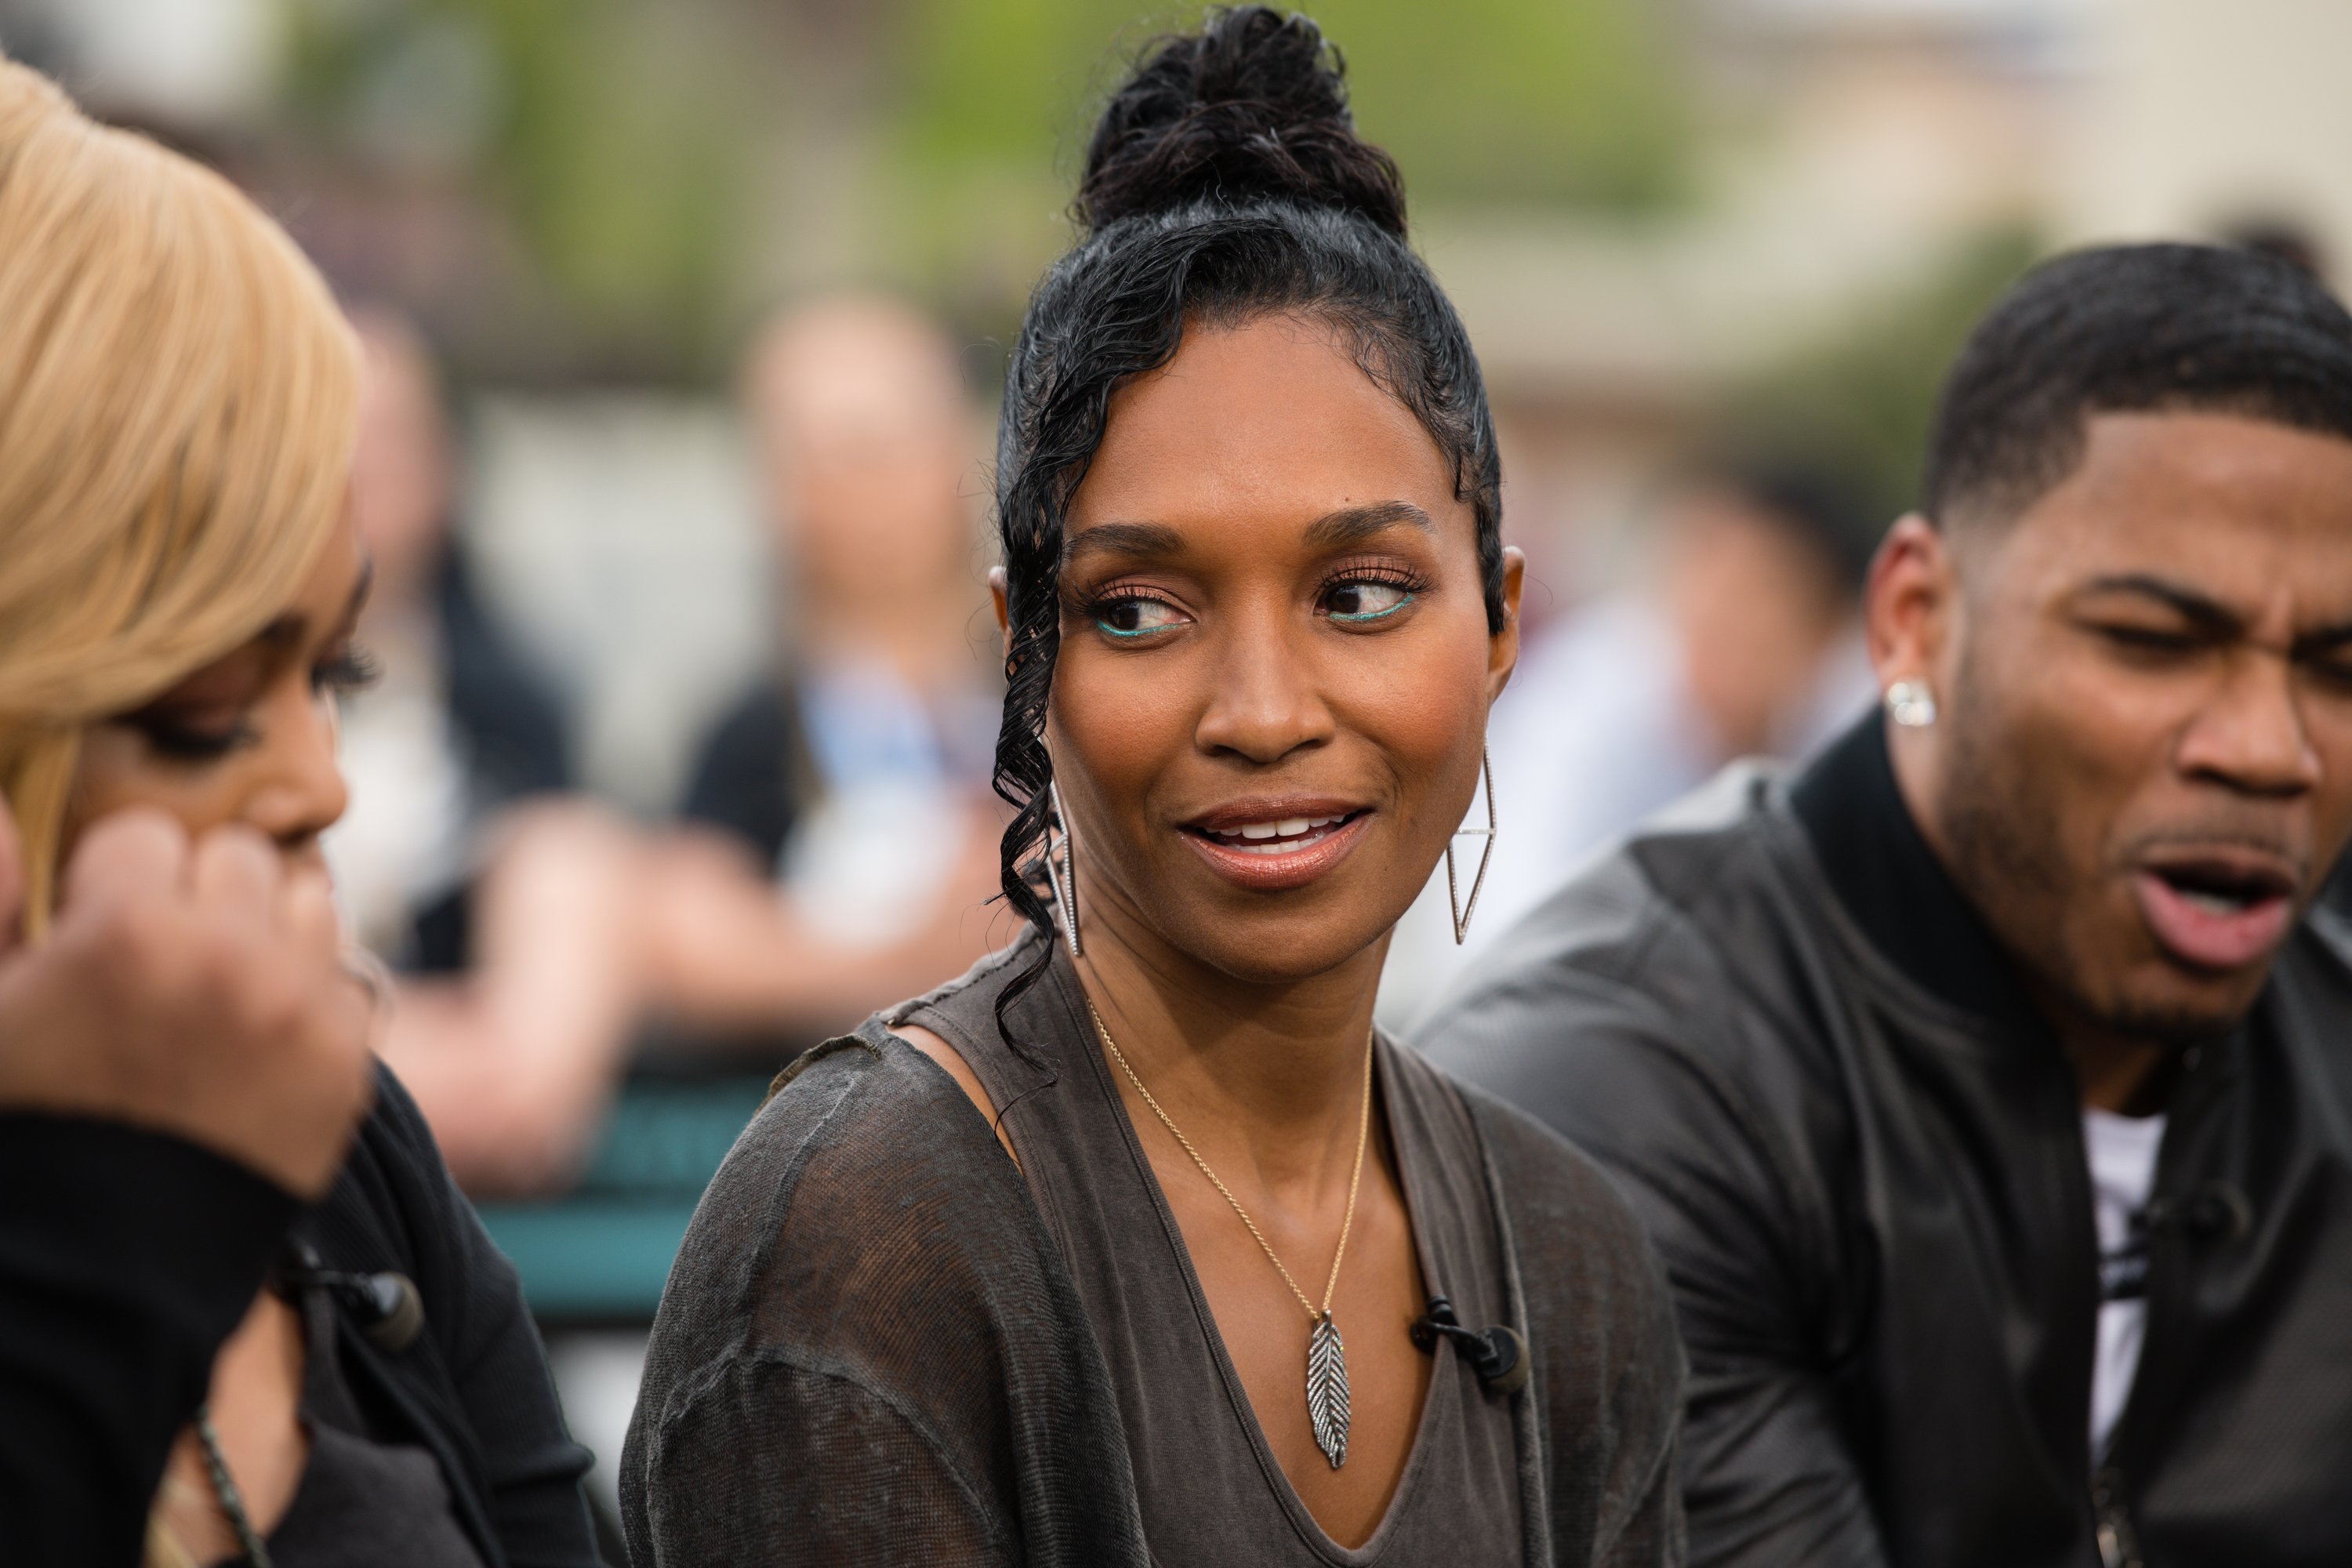 Rozonda 'Chilli' Thomas visits "Extra" at Universal Studios Hollywood on May 15, 2019 in Universal City, California | Photo: GettyImages